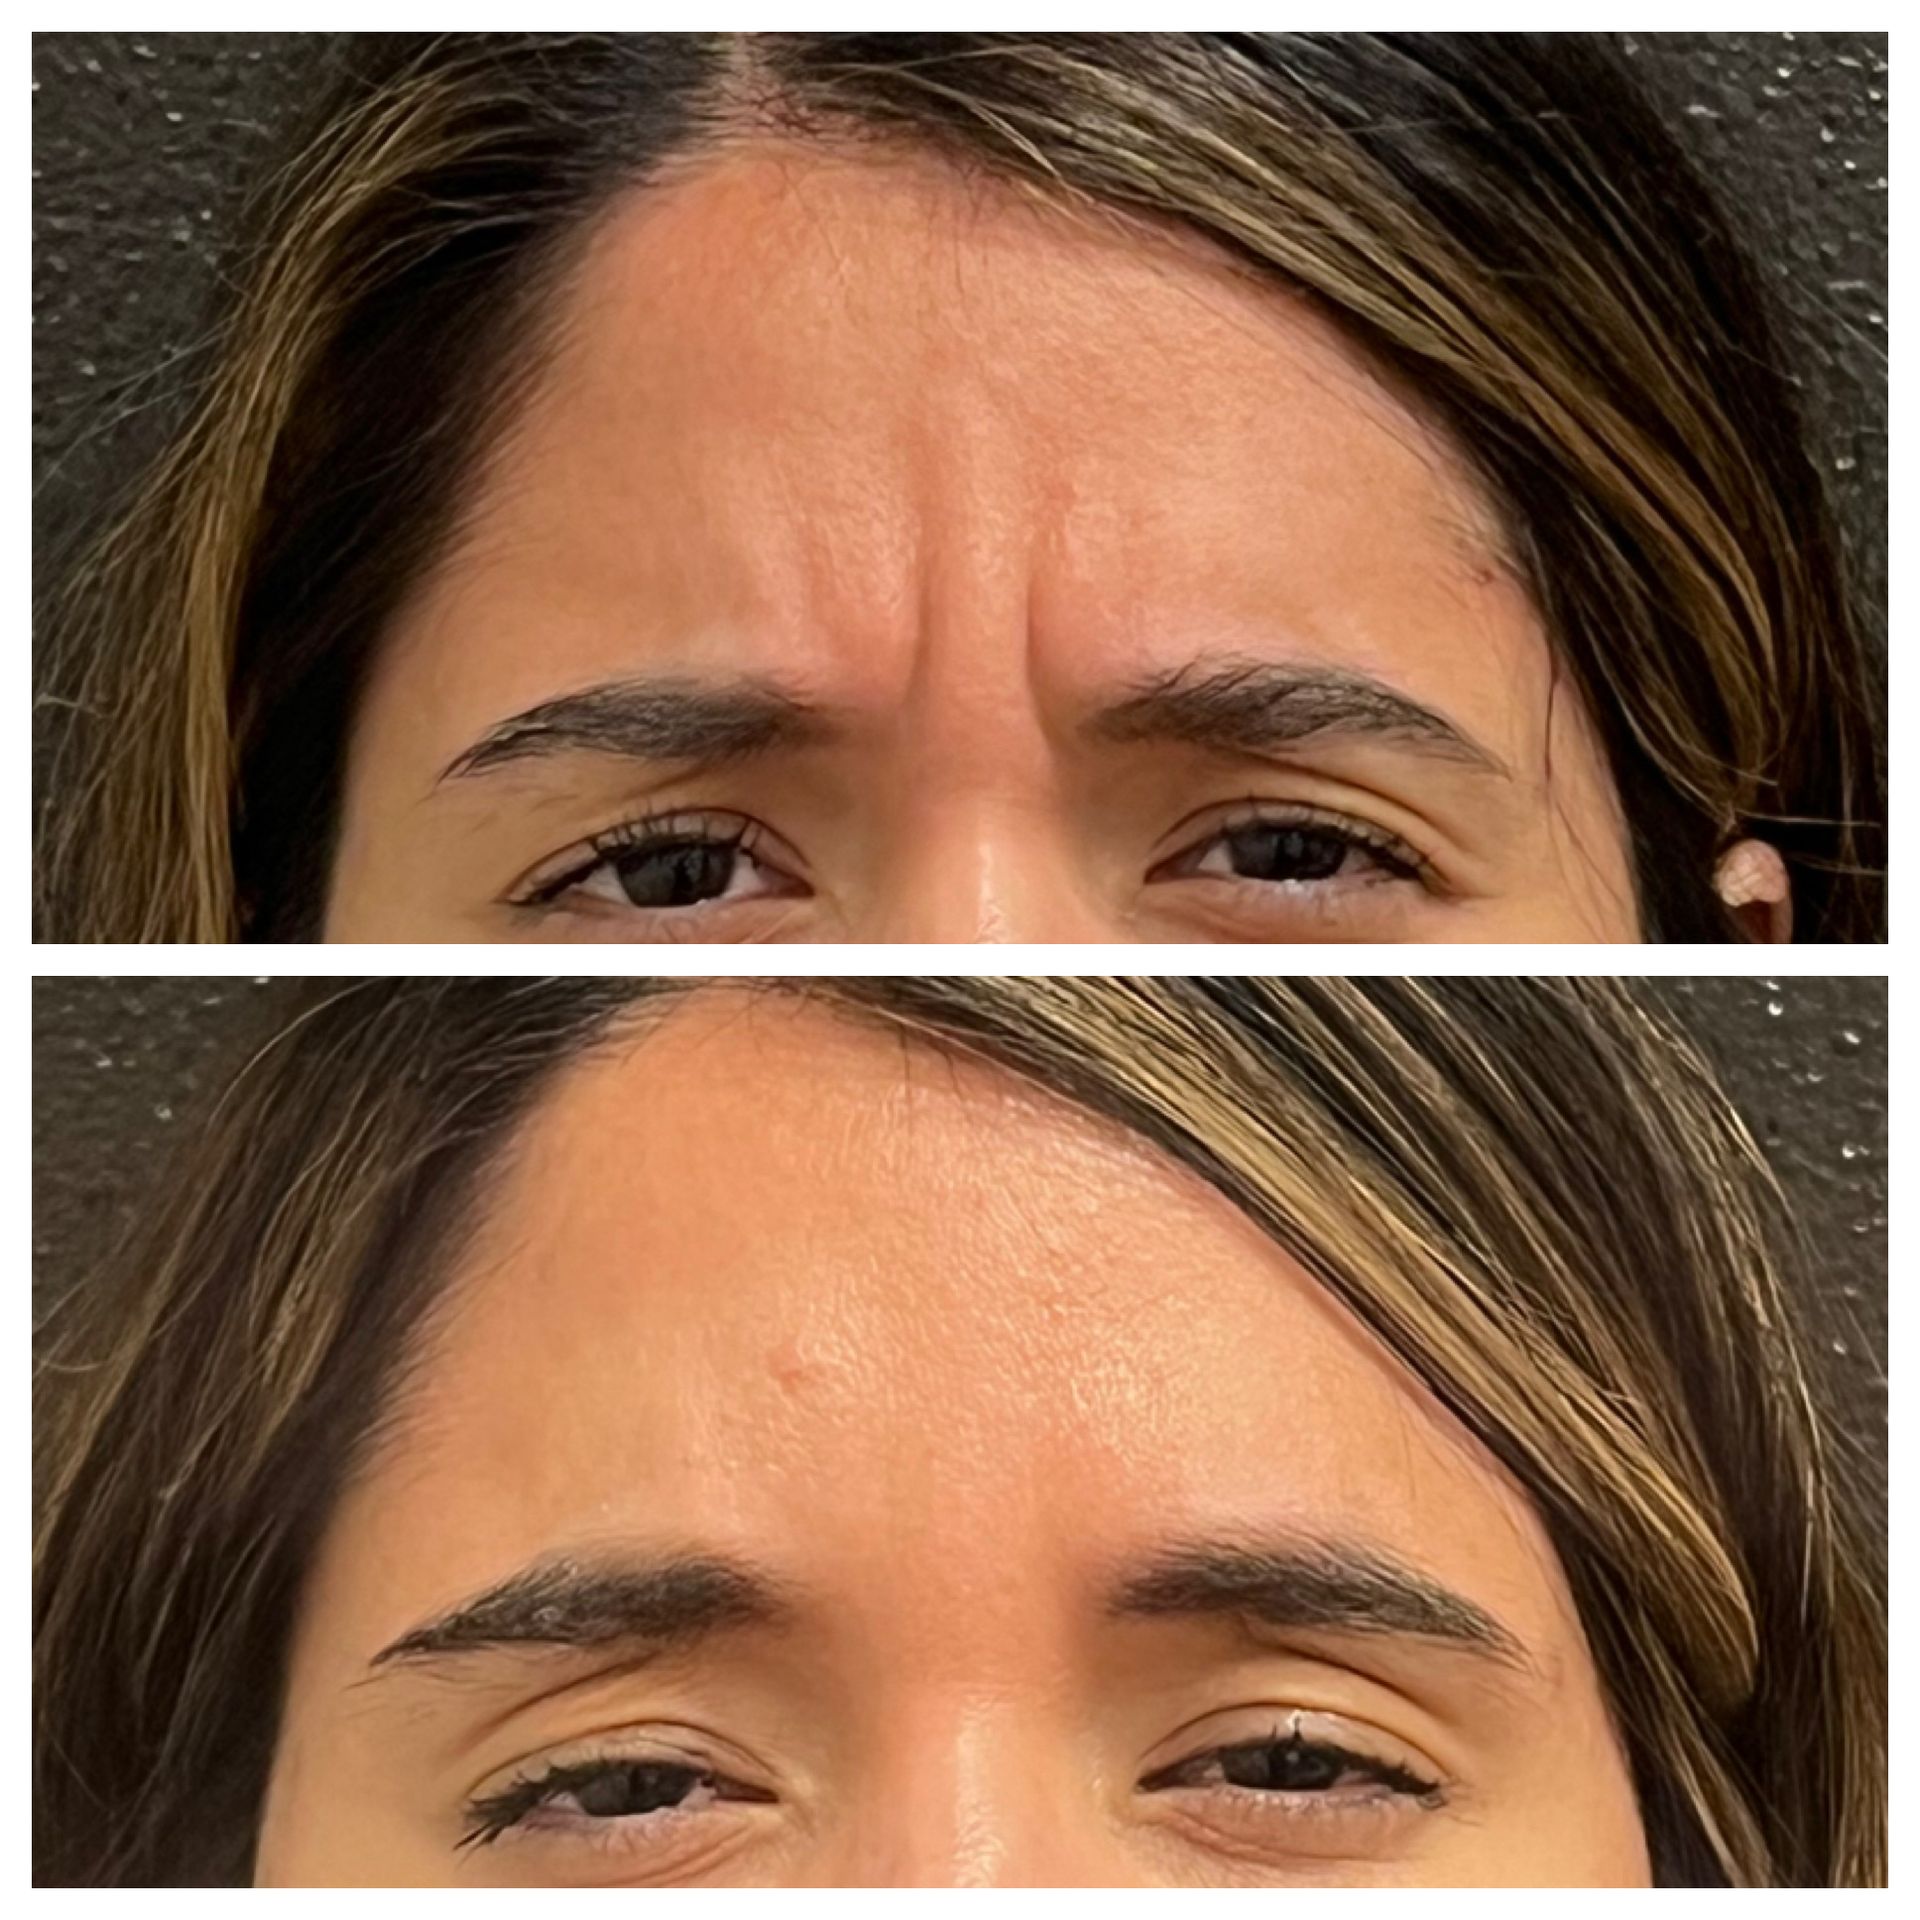 a before and after photo of a woman 's forehead with wrinkles .